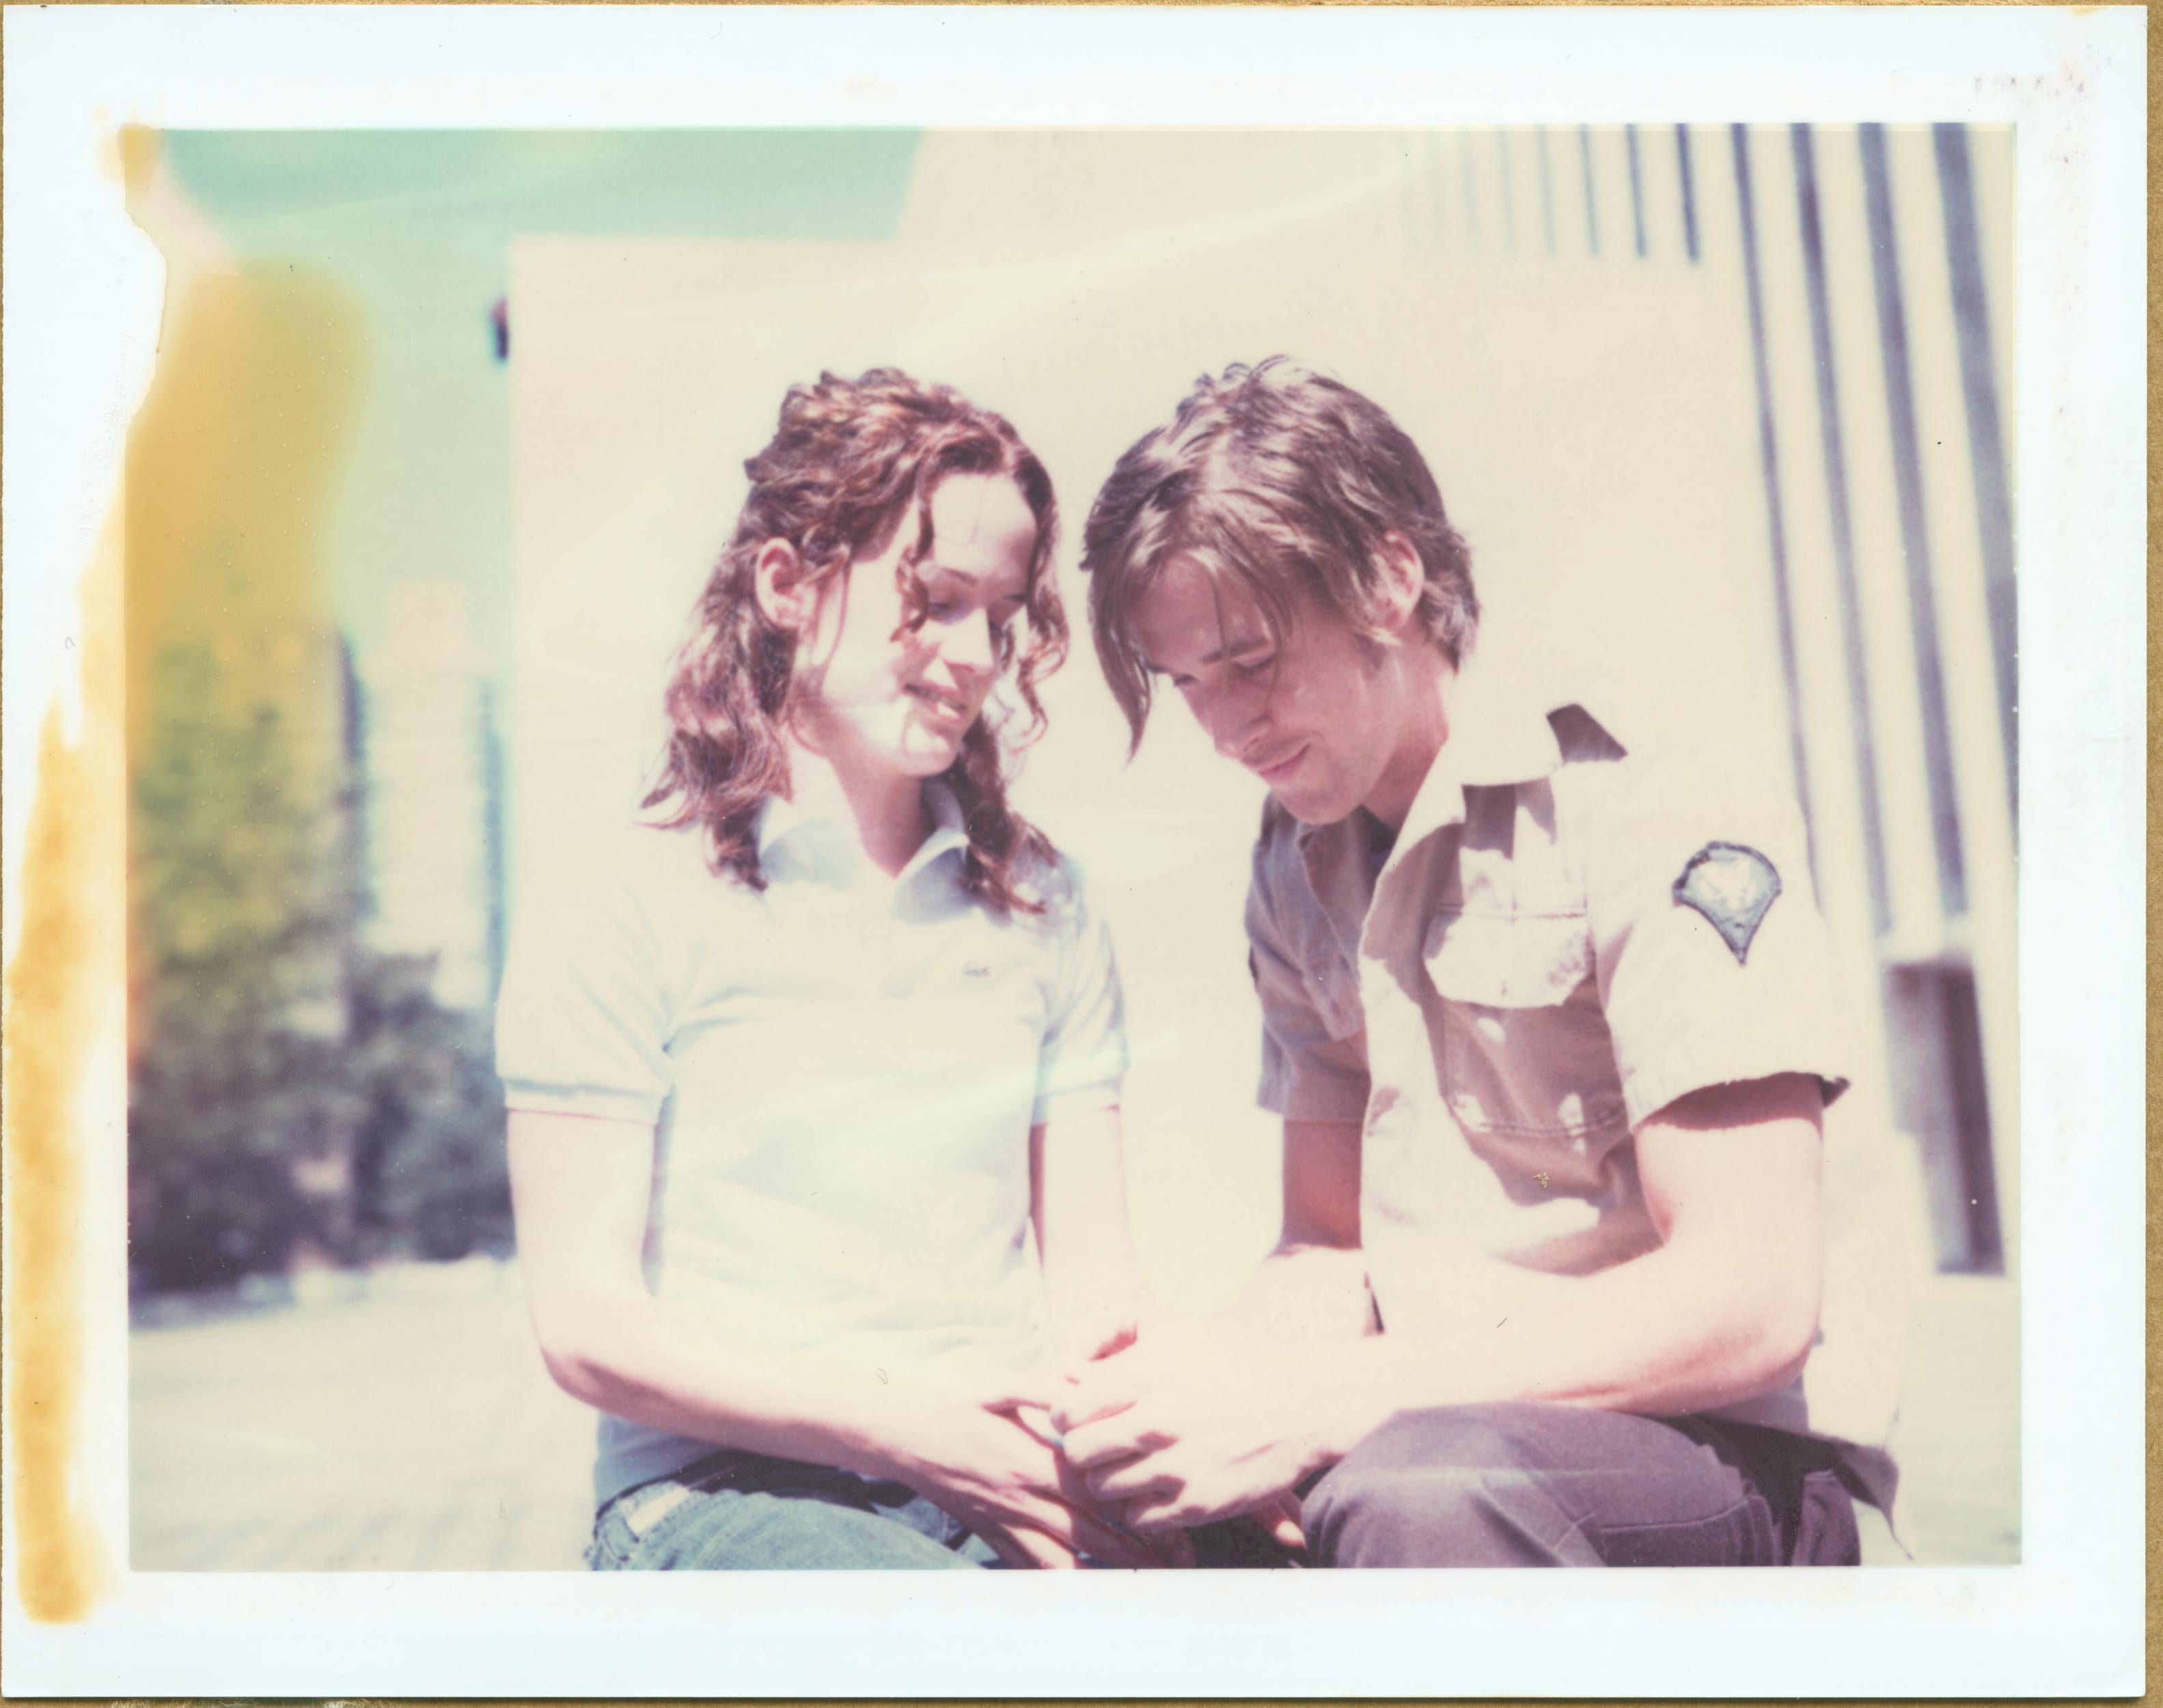 Stefanie Schneider Color Photograph - Athena and Henry (Stay) - starring Ryan Gosling and Elizabeth Reaser - Polaroid